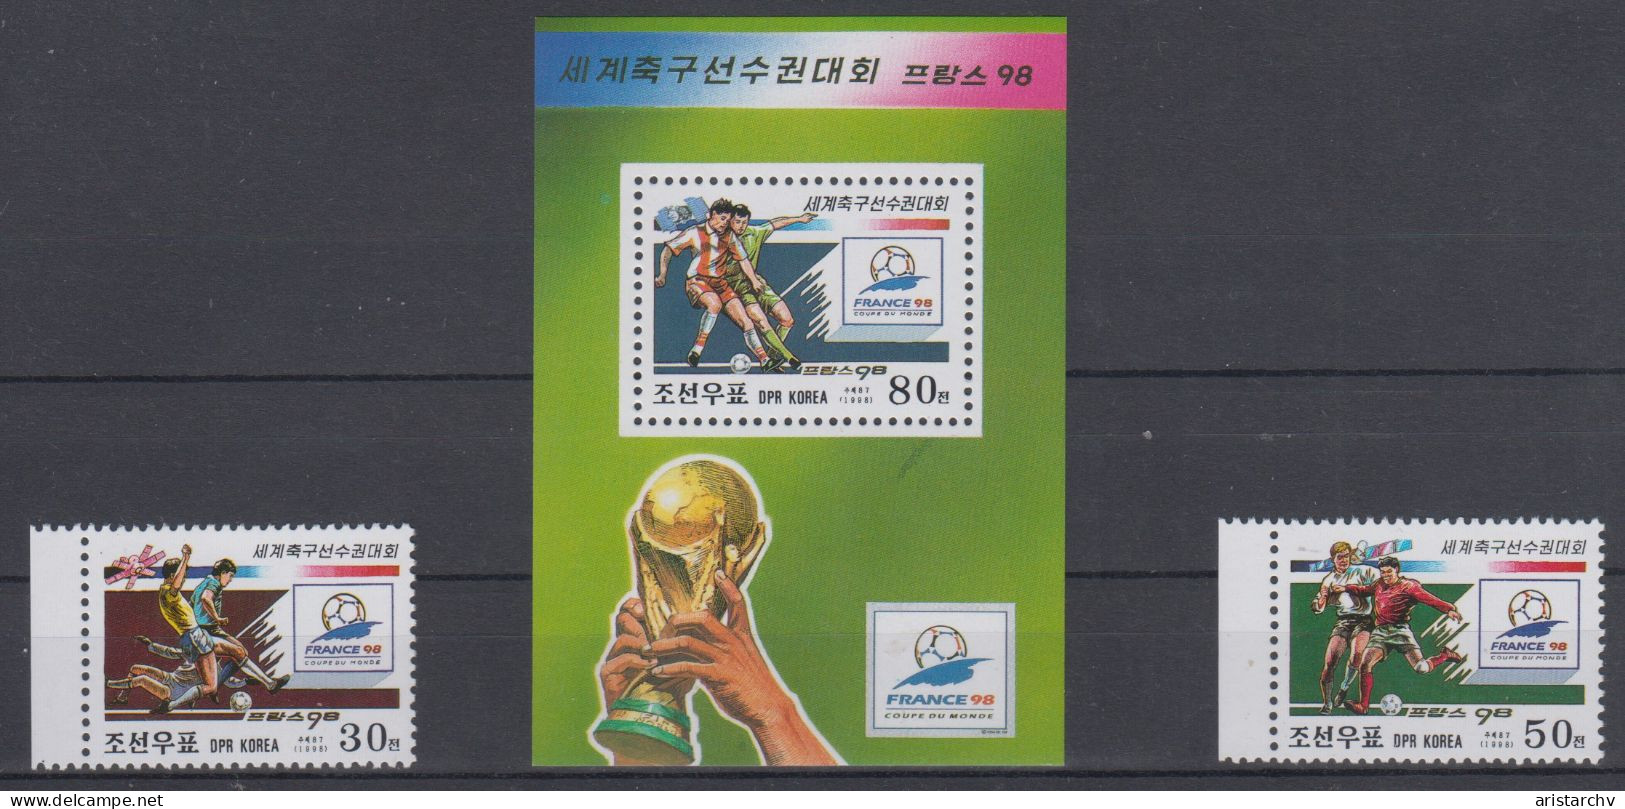 NORTH KOREA 1998 FOOTBALL WORLD CUP S/SHEET 2 STAMPS AND SHEETLET - 1998 – Francia